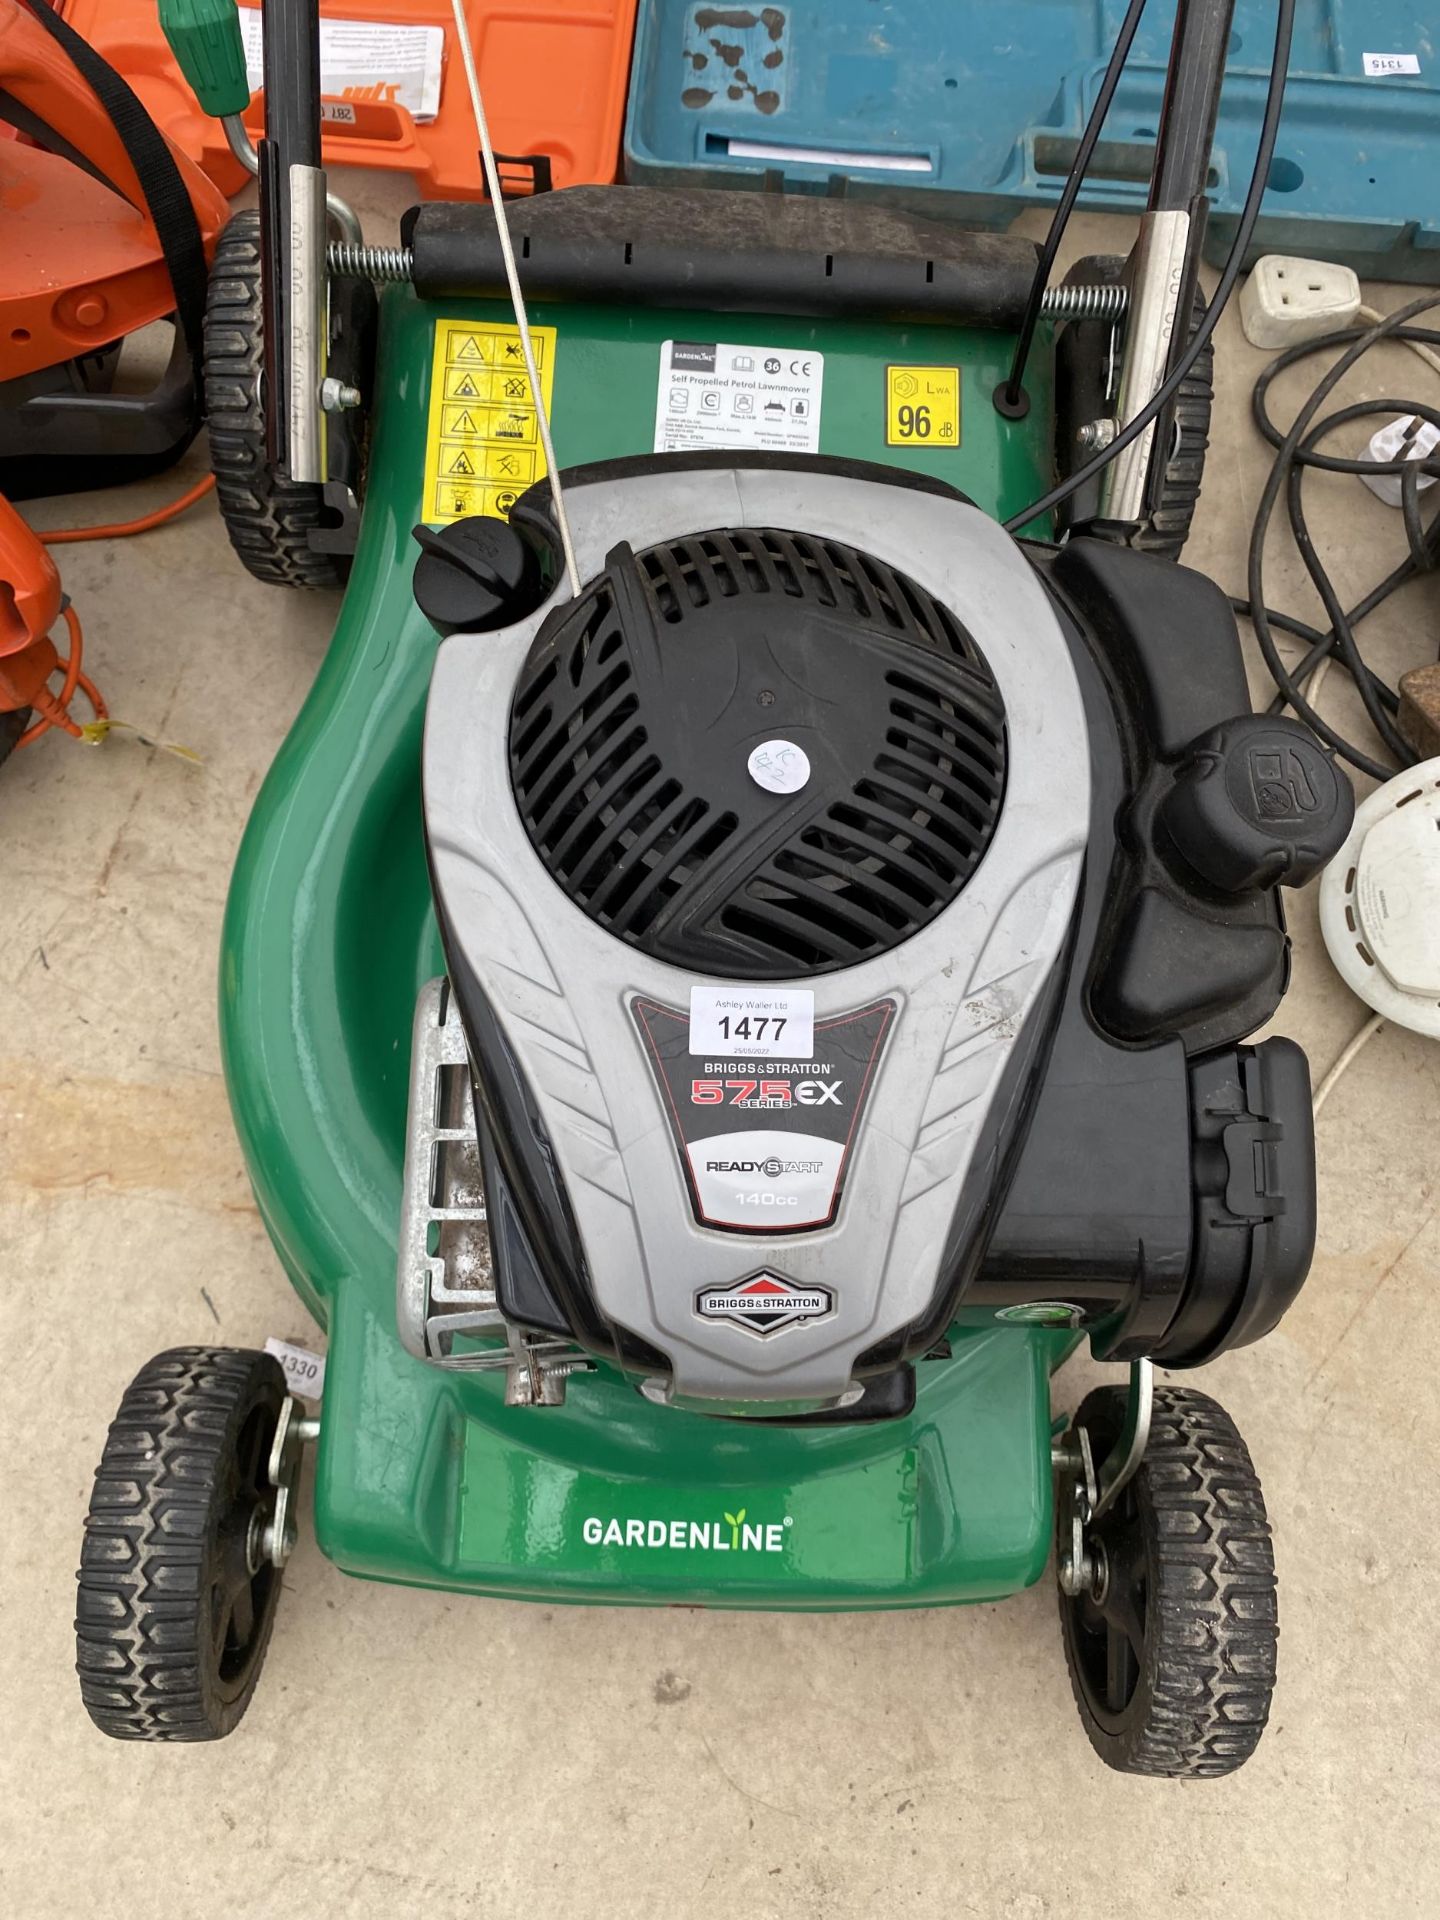 A GARDENLINE PETROL LAWN MOWER WITH BRIGGS AND STRATTON ENGINE - Image 3 of 4